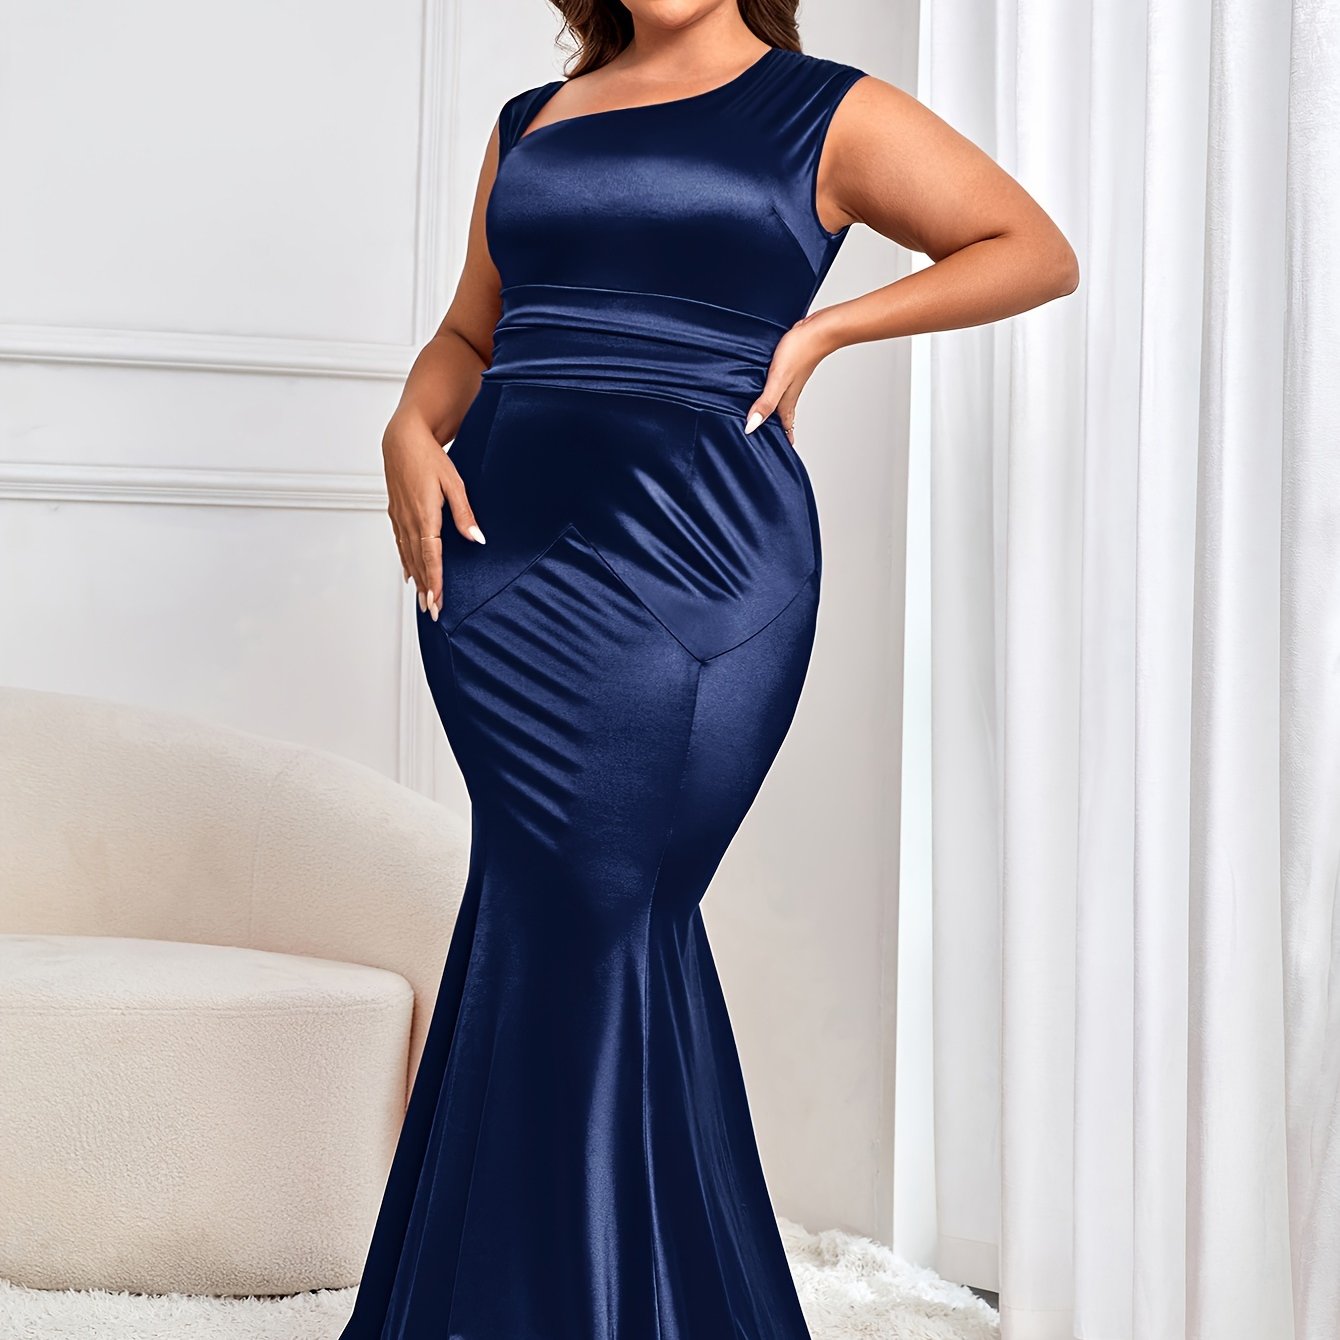 plus size asymmetrical mother of the bride dress elegant sleeveless fit flare dress for wedding party womens plus size clothing